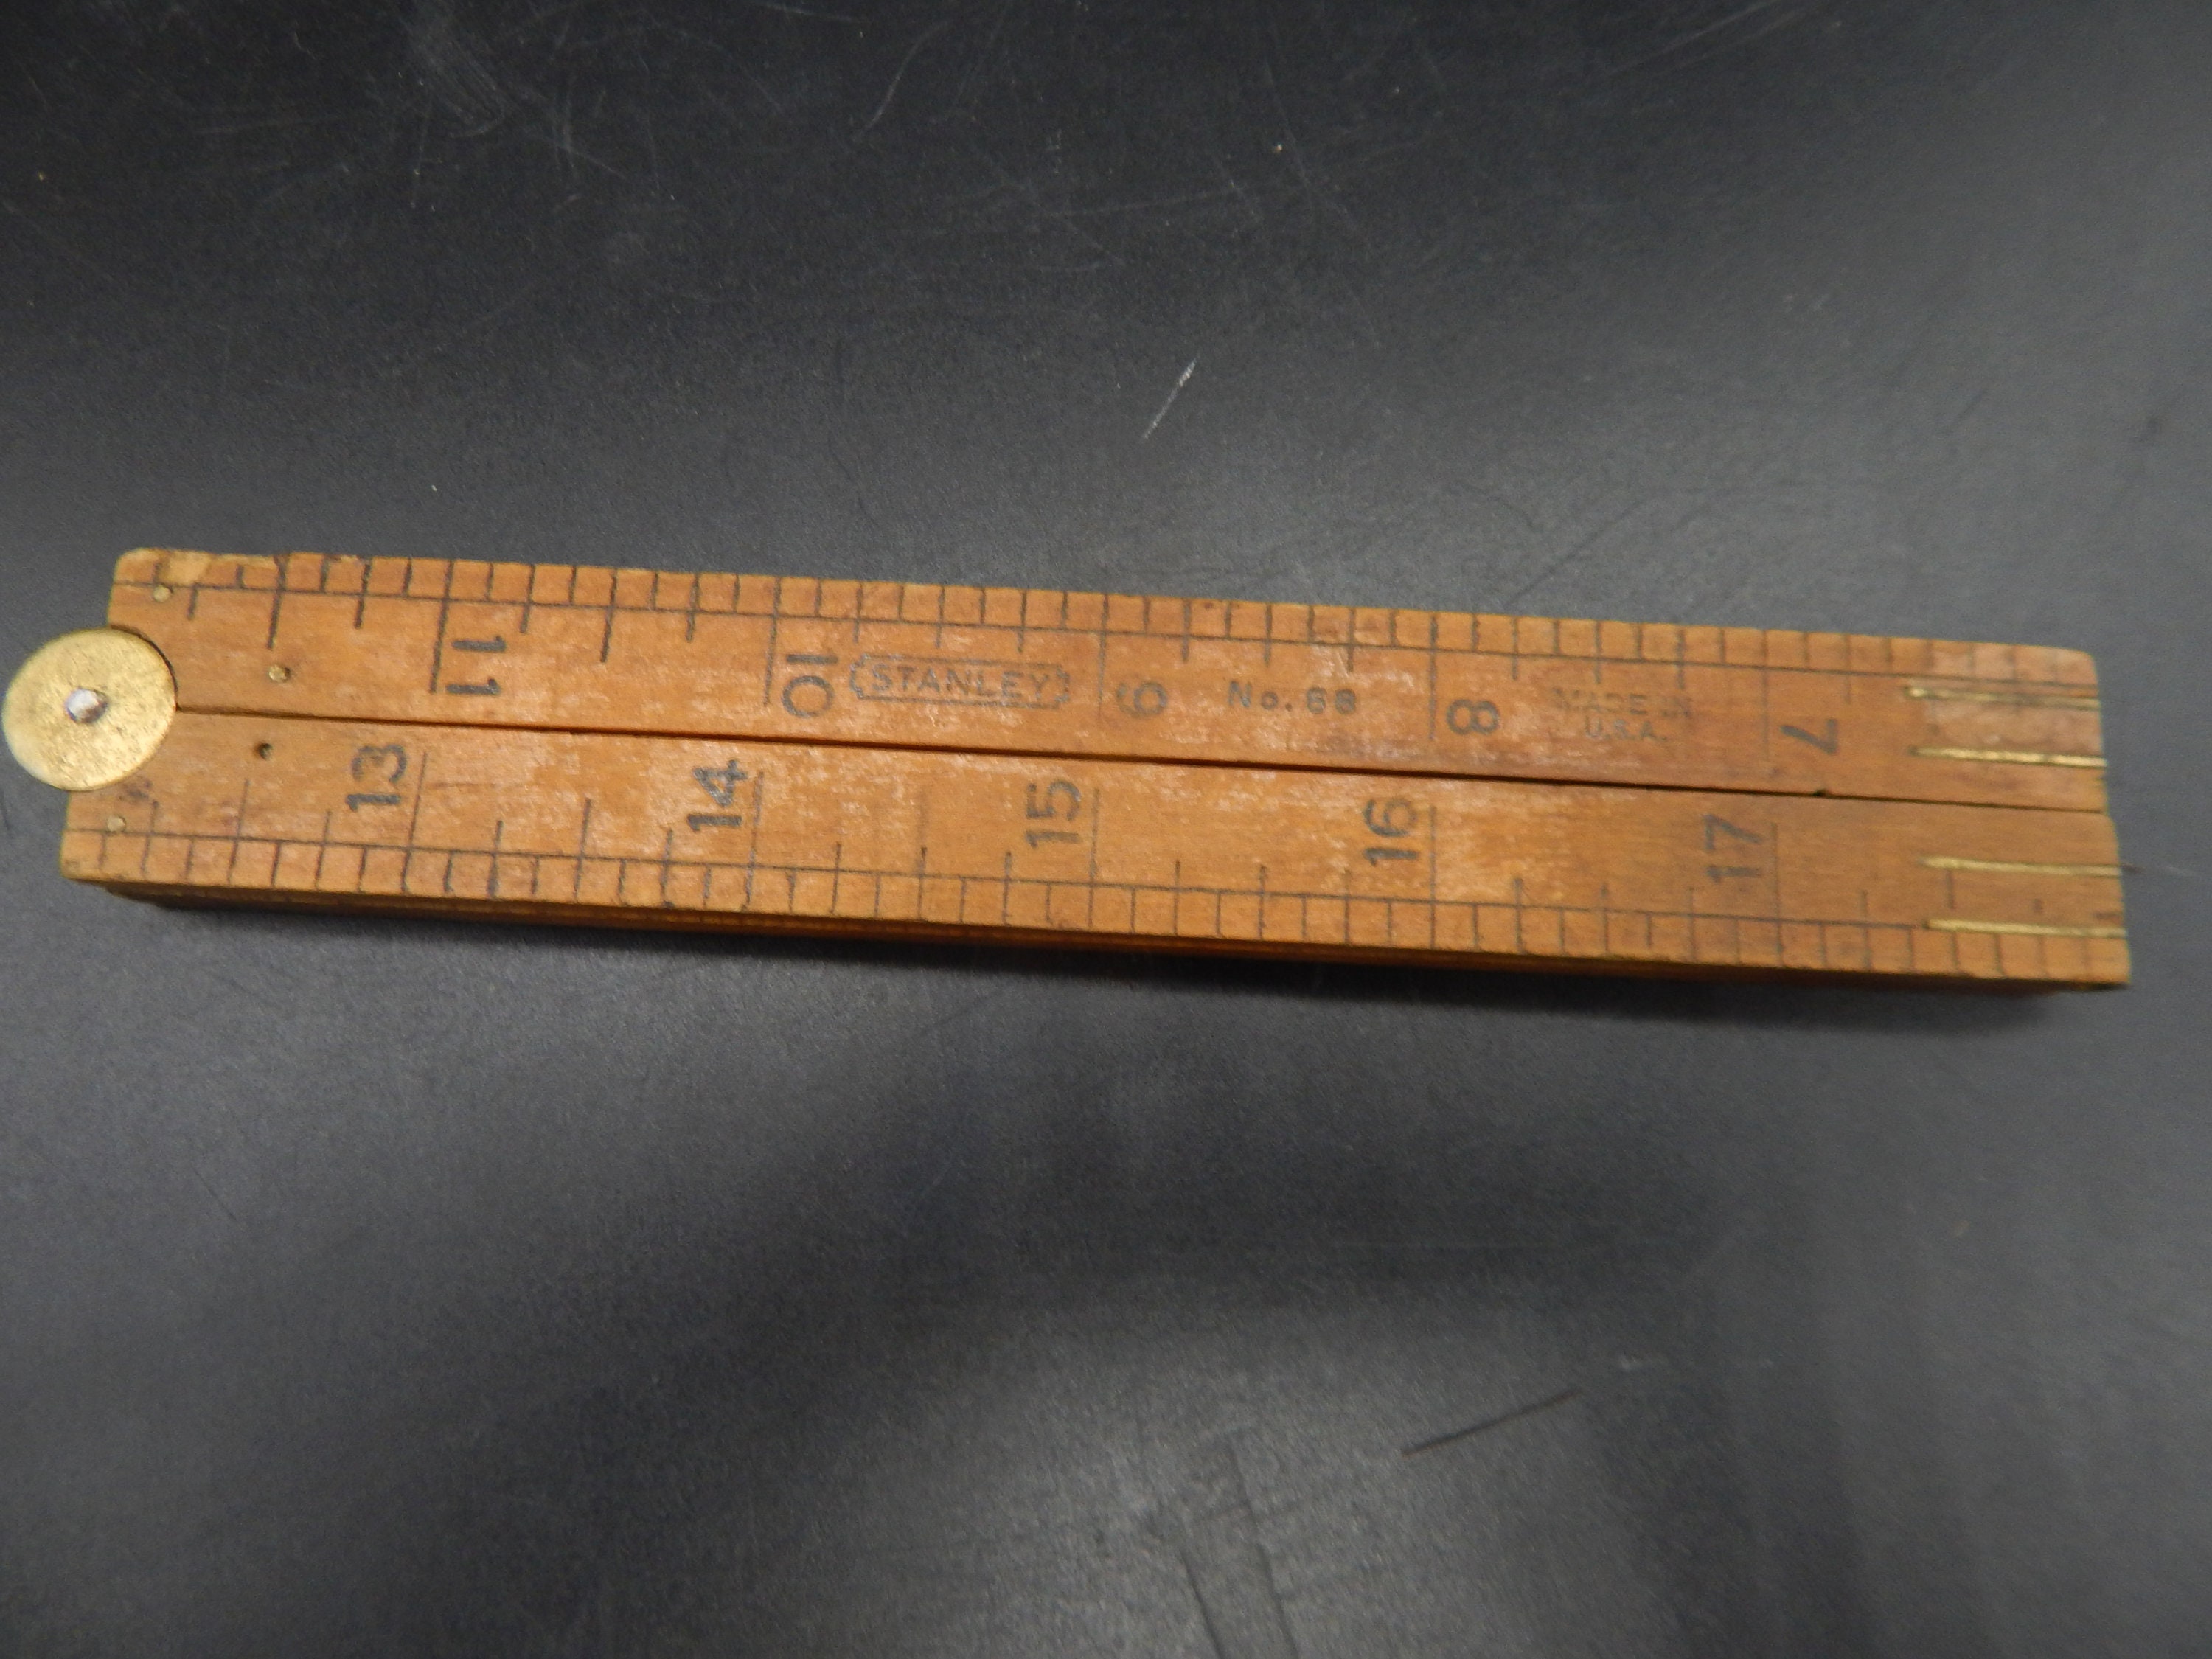 Vintage Folding Yard Stick Ruler, Wood and Metal Hinge, Made in USA  Industrial Tool, Antique Tool, Steam Punk, Stanley X226, Stanguard -   Israel